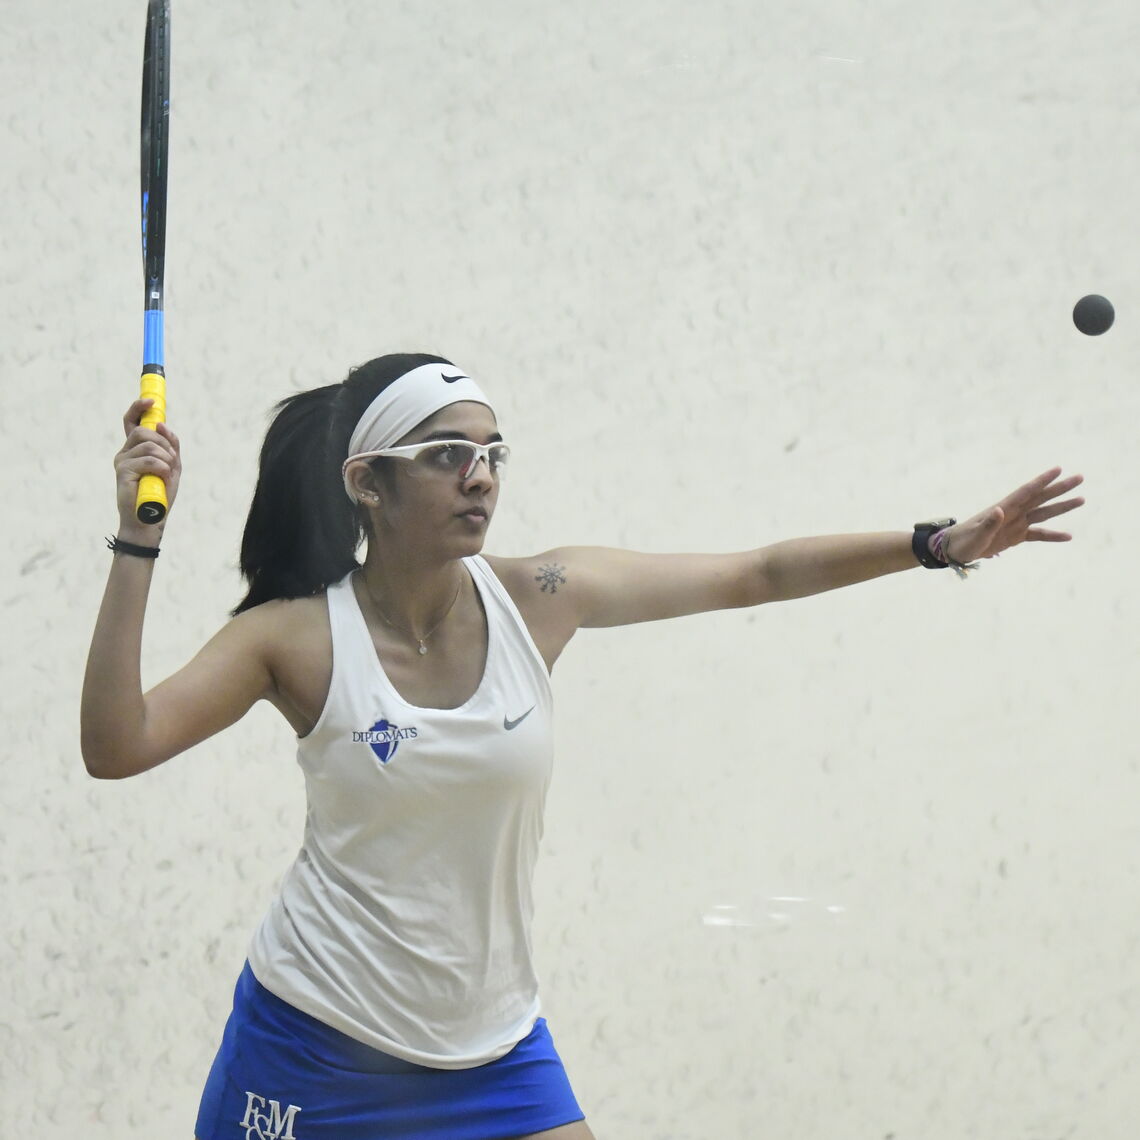 A squash injury helped Aryaa Ogale '24 realize her passion for sports rehabilitation. "I wanted to be on the flip side from being a patient to observing how the doctors treat them," she said.